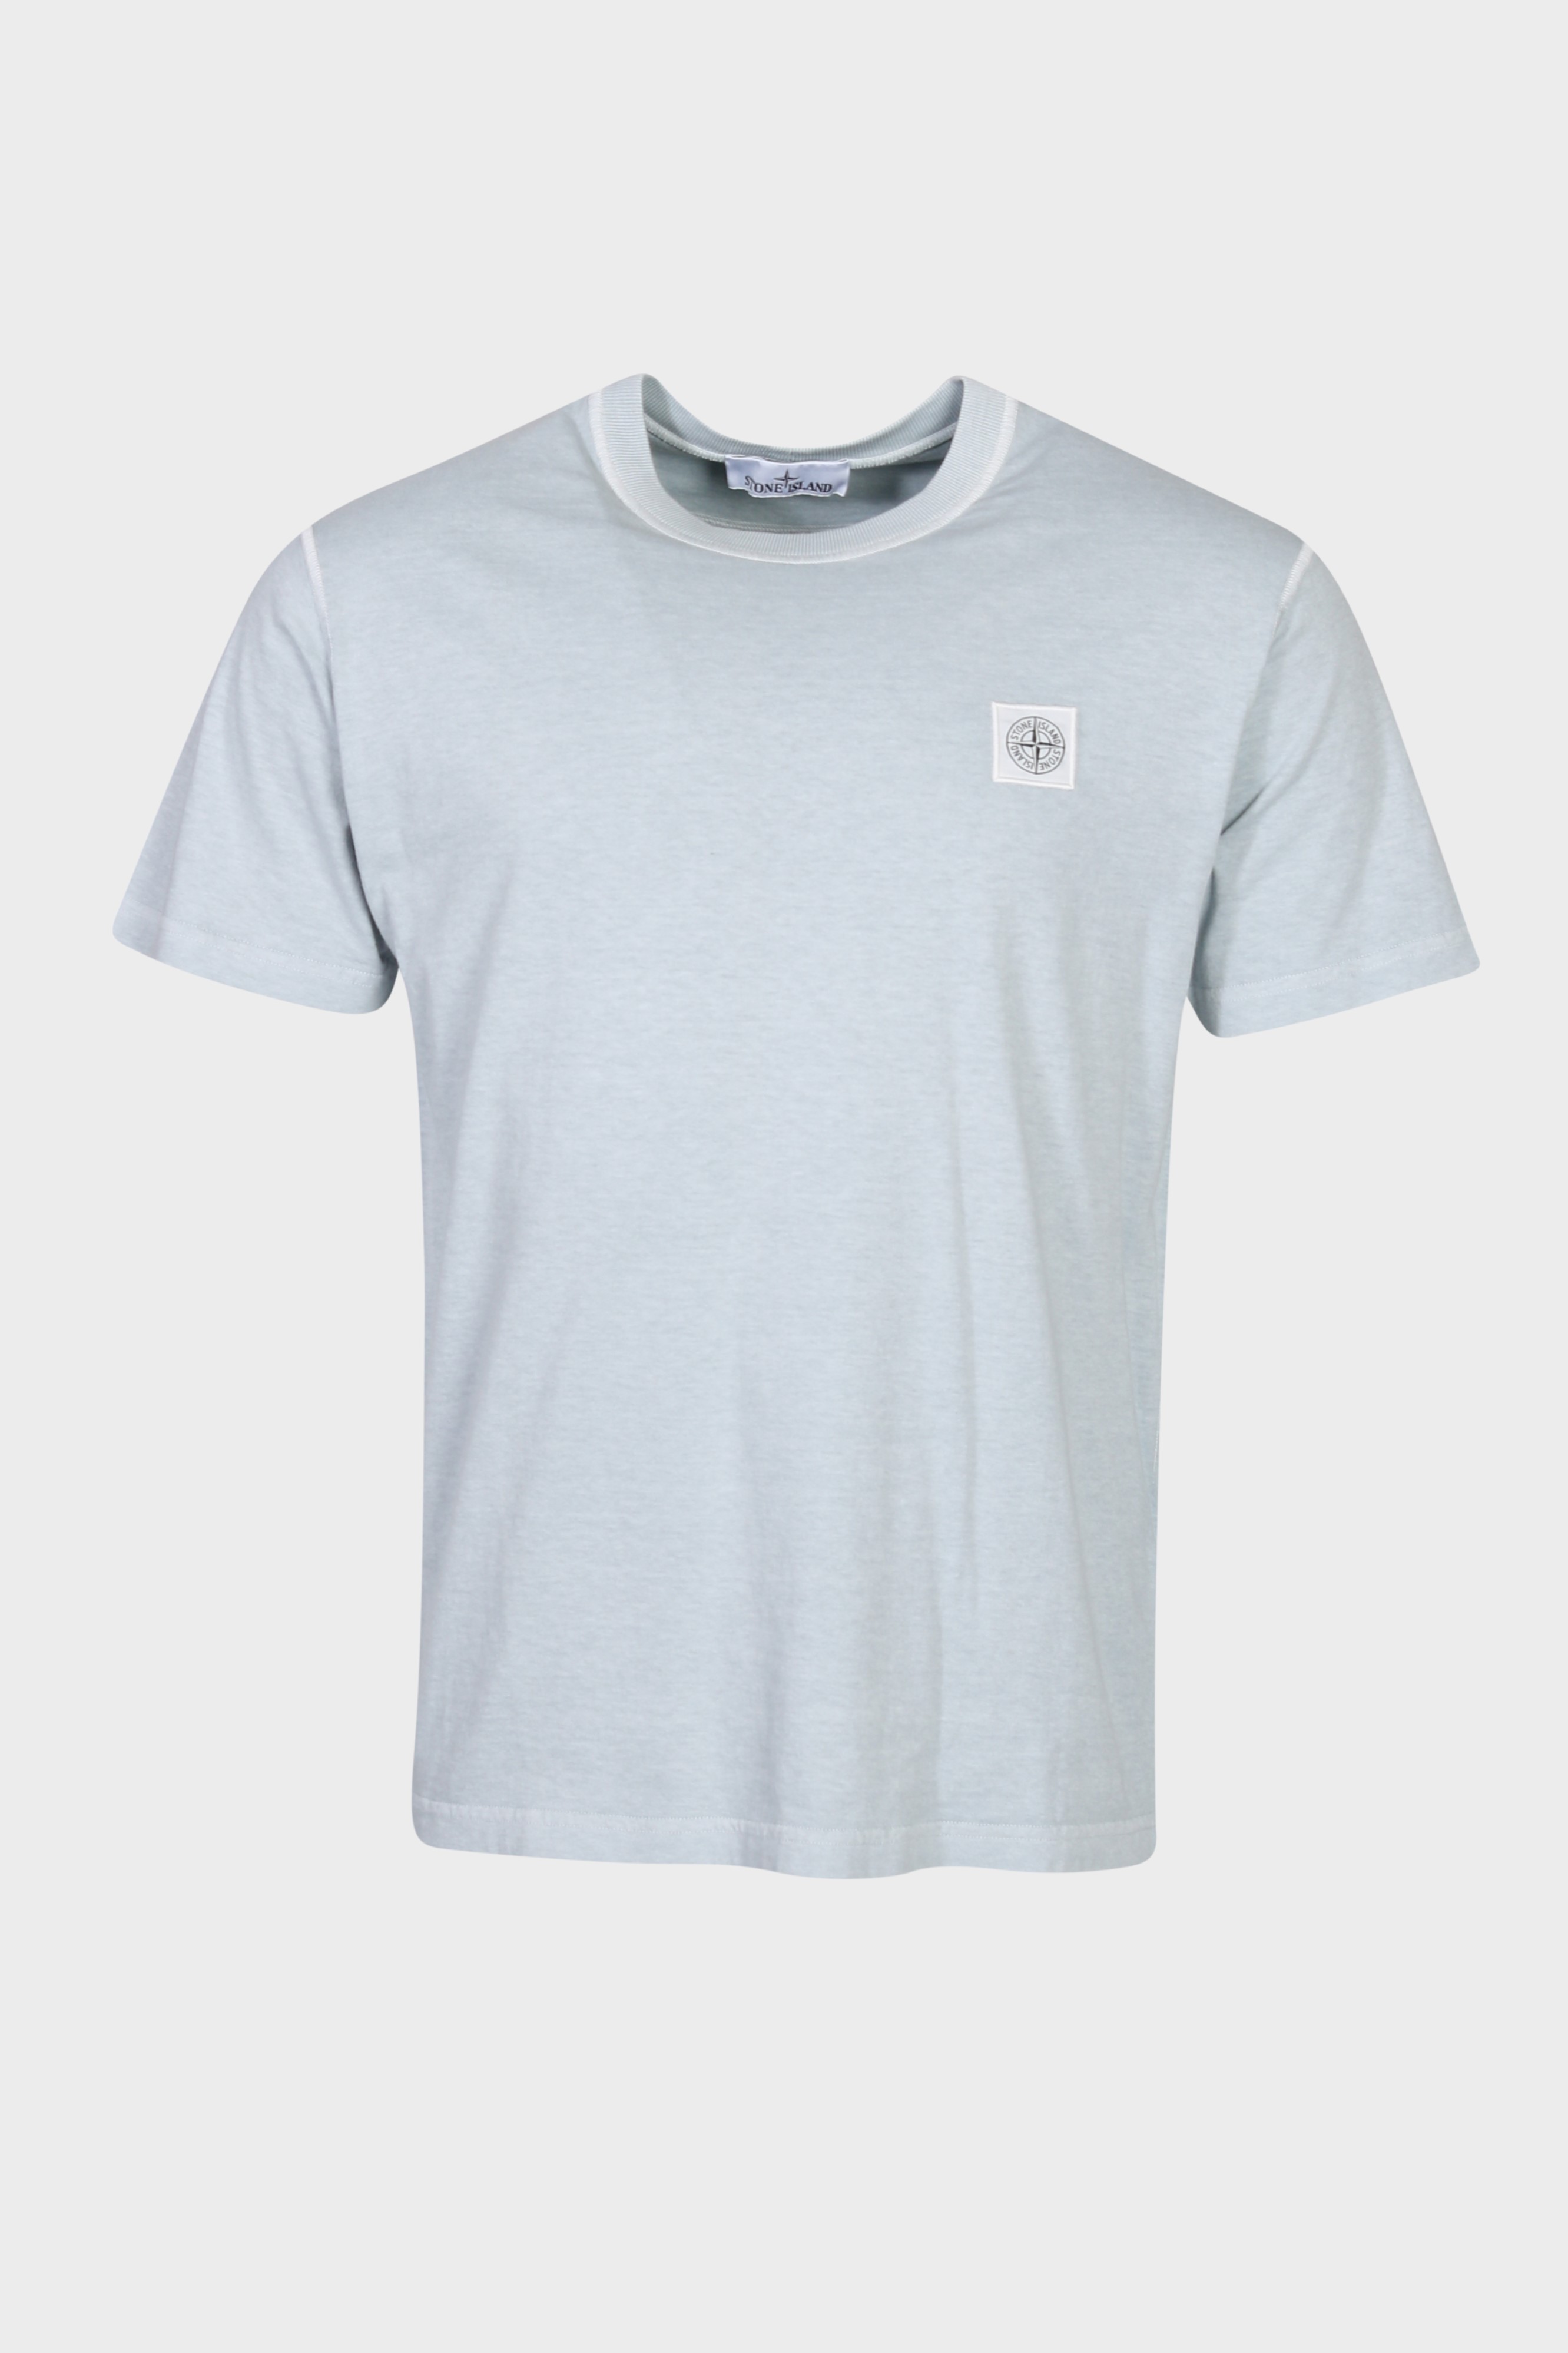 STONE ISLAND T-Shirt in Washed Sky Blue 2XL